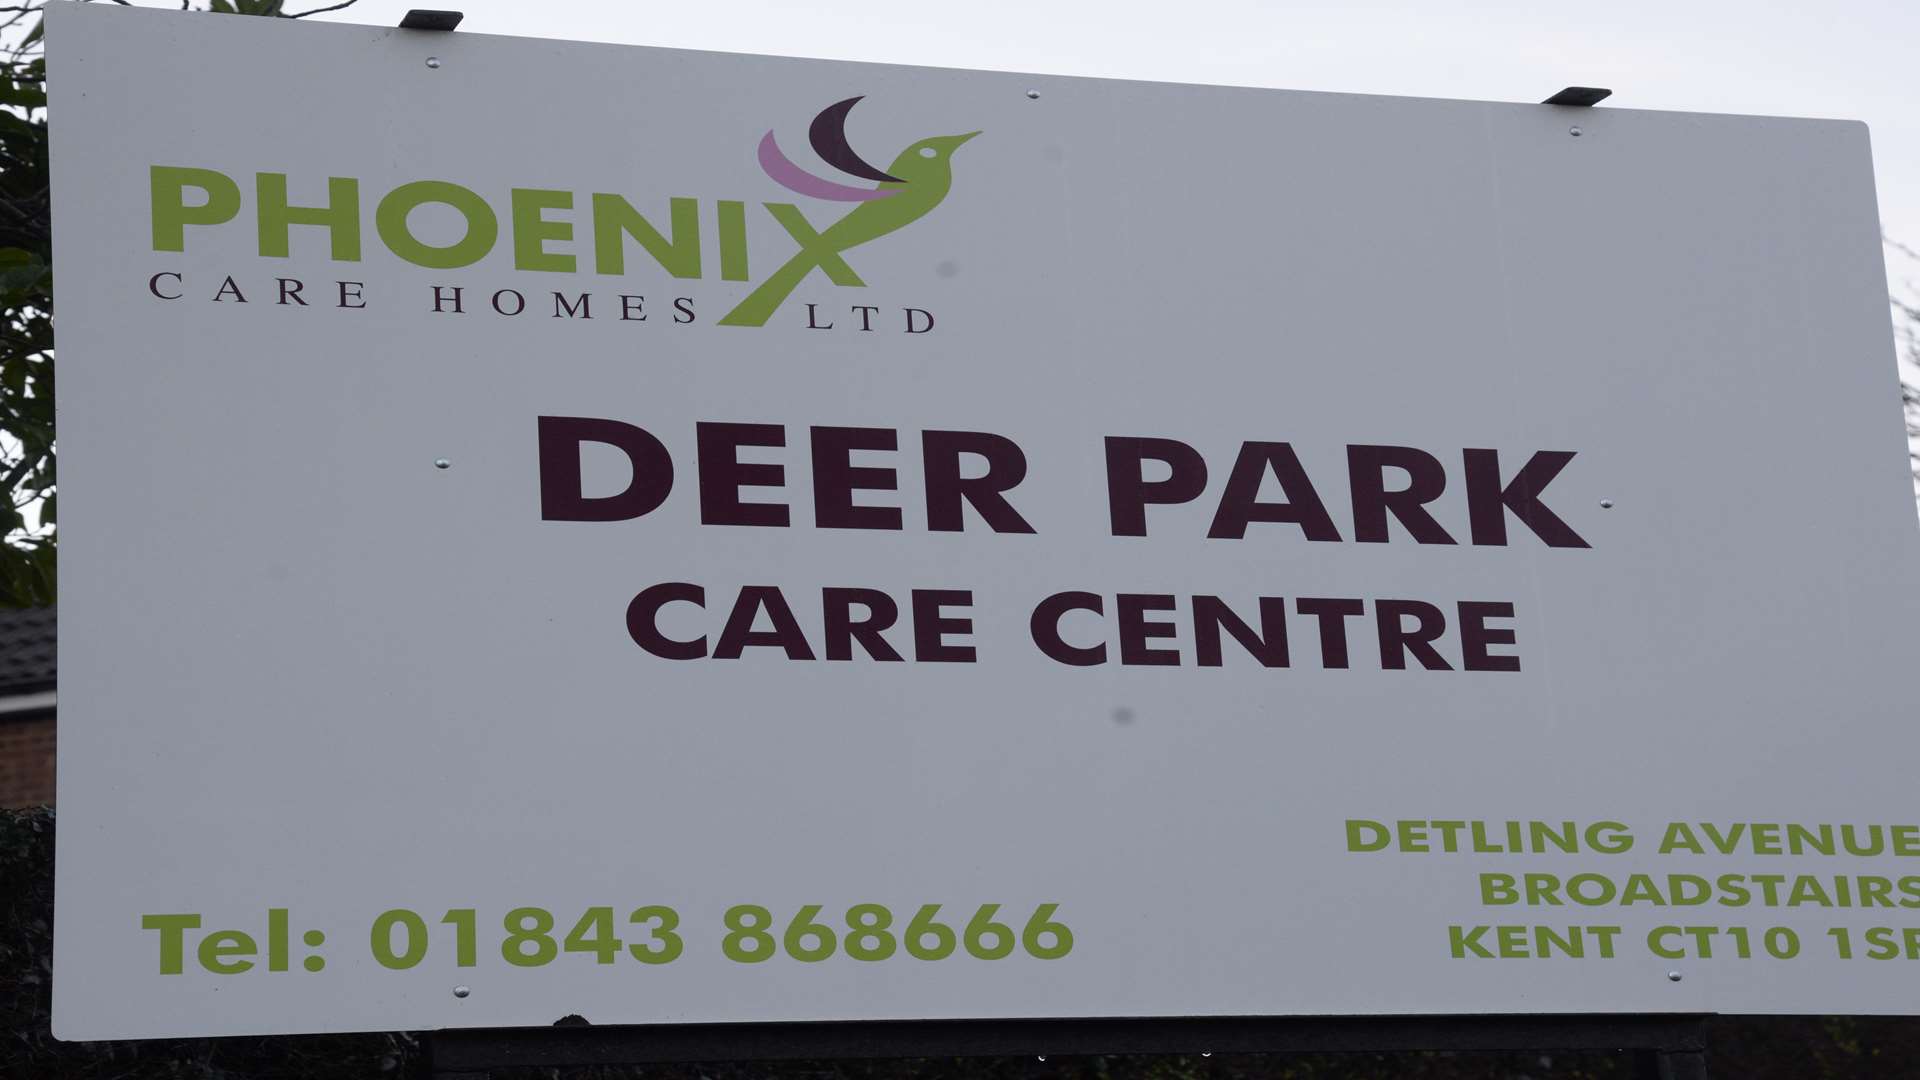 The Deer Park Care Centre has been told to improve